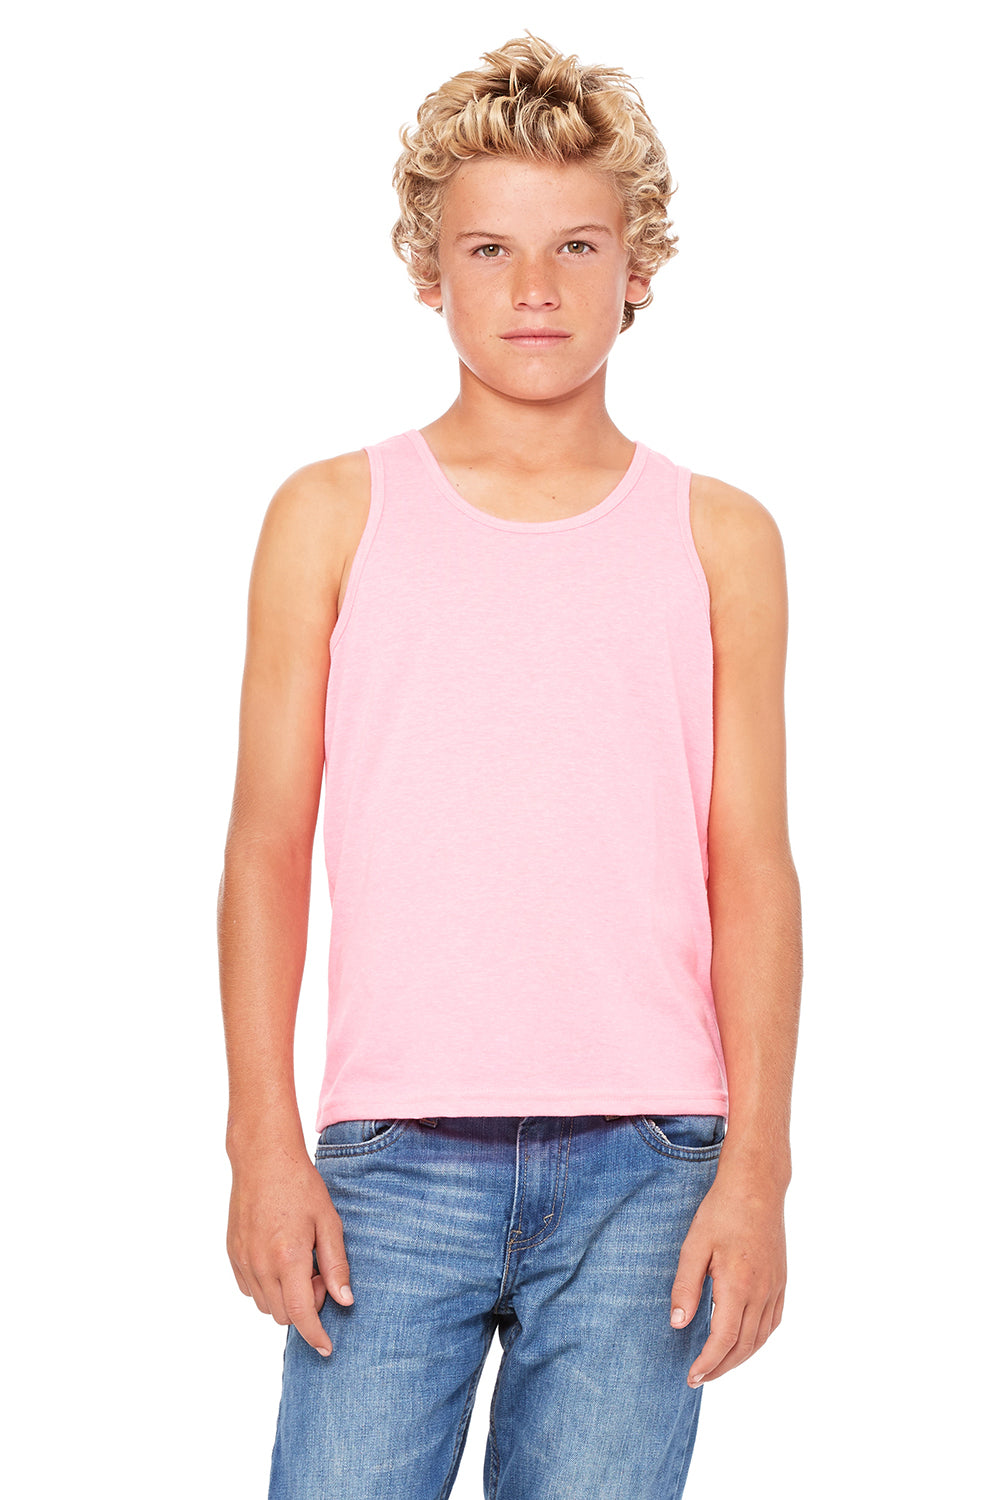 Bella + Canvas 3480Y Youth Jersey Tank Top Neon Pink Front